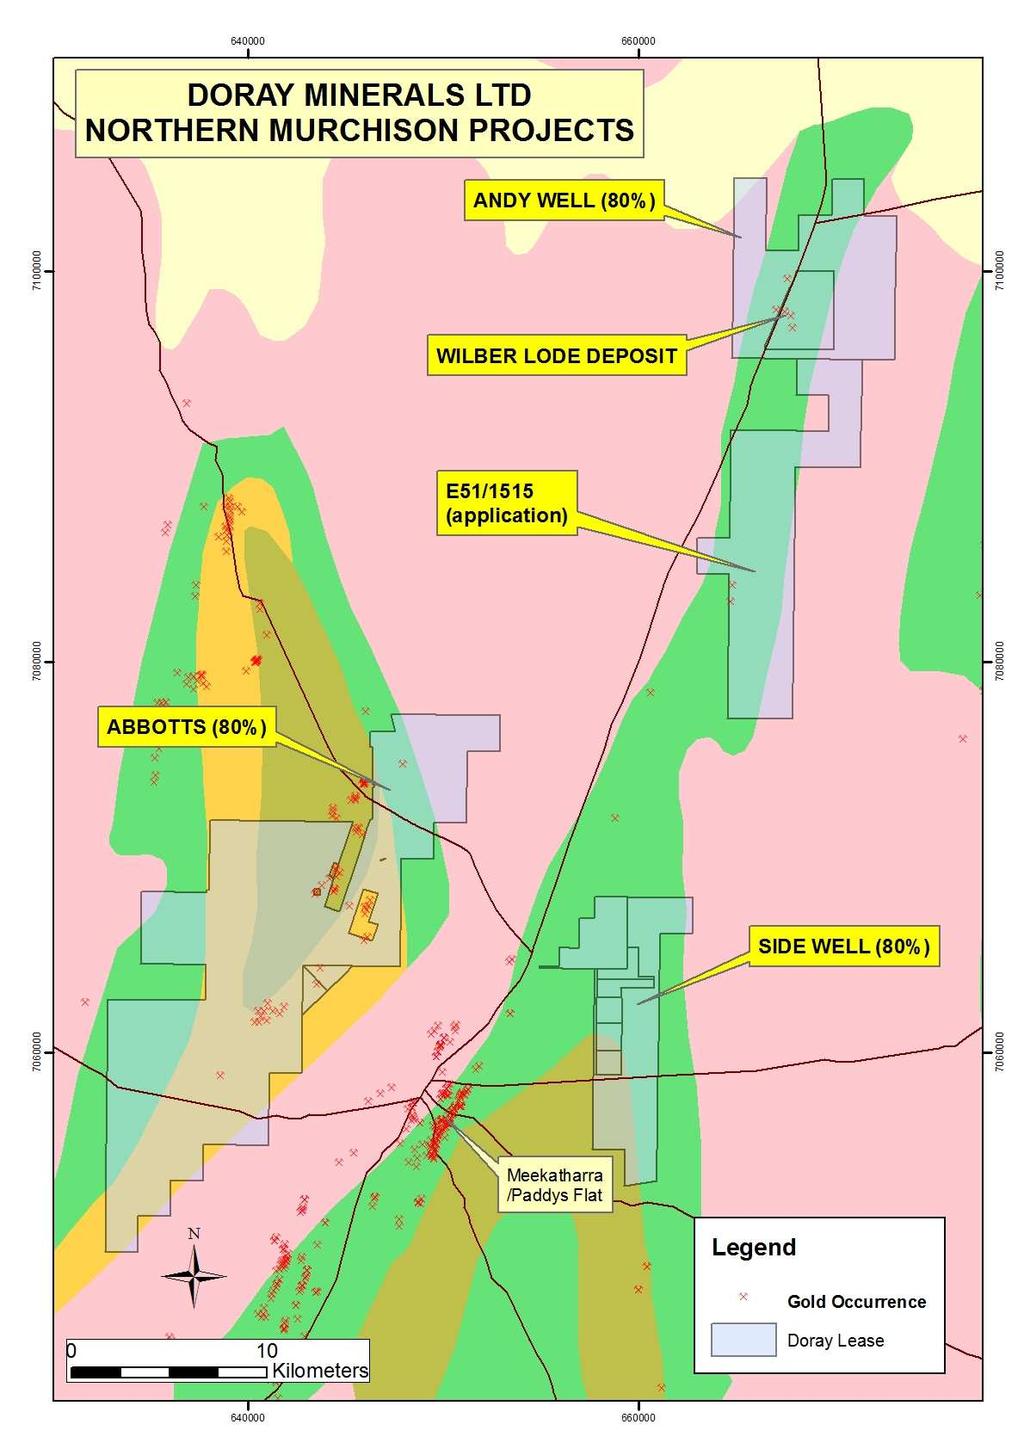 Andy Well Andy Well Gold Project (Doray 80%) 45km north of Meekatharra via major highway Northern end of Meekatharra Greenstone Belt High grade Wilber Lode deposit High